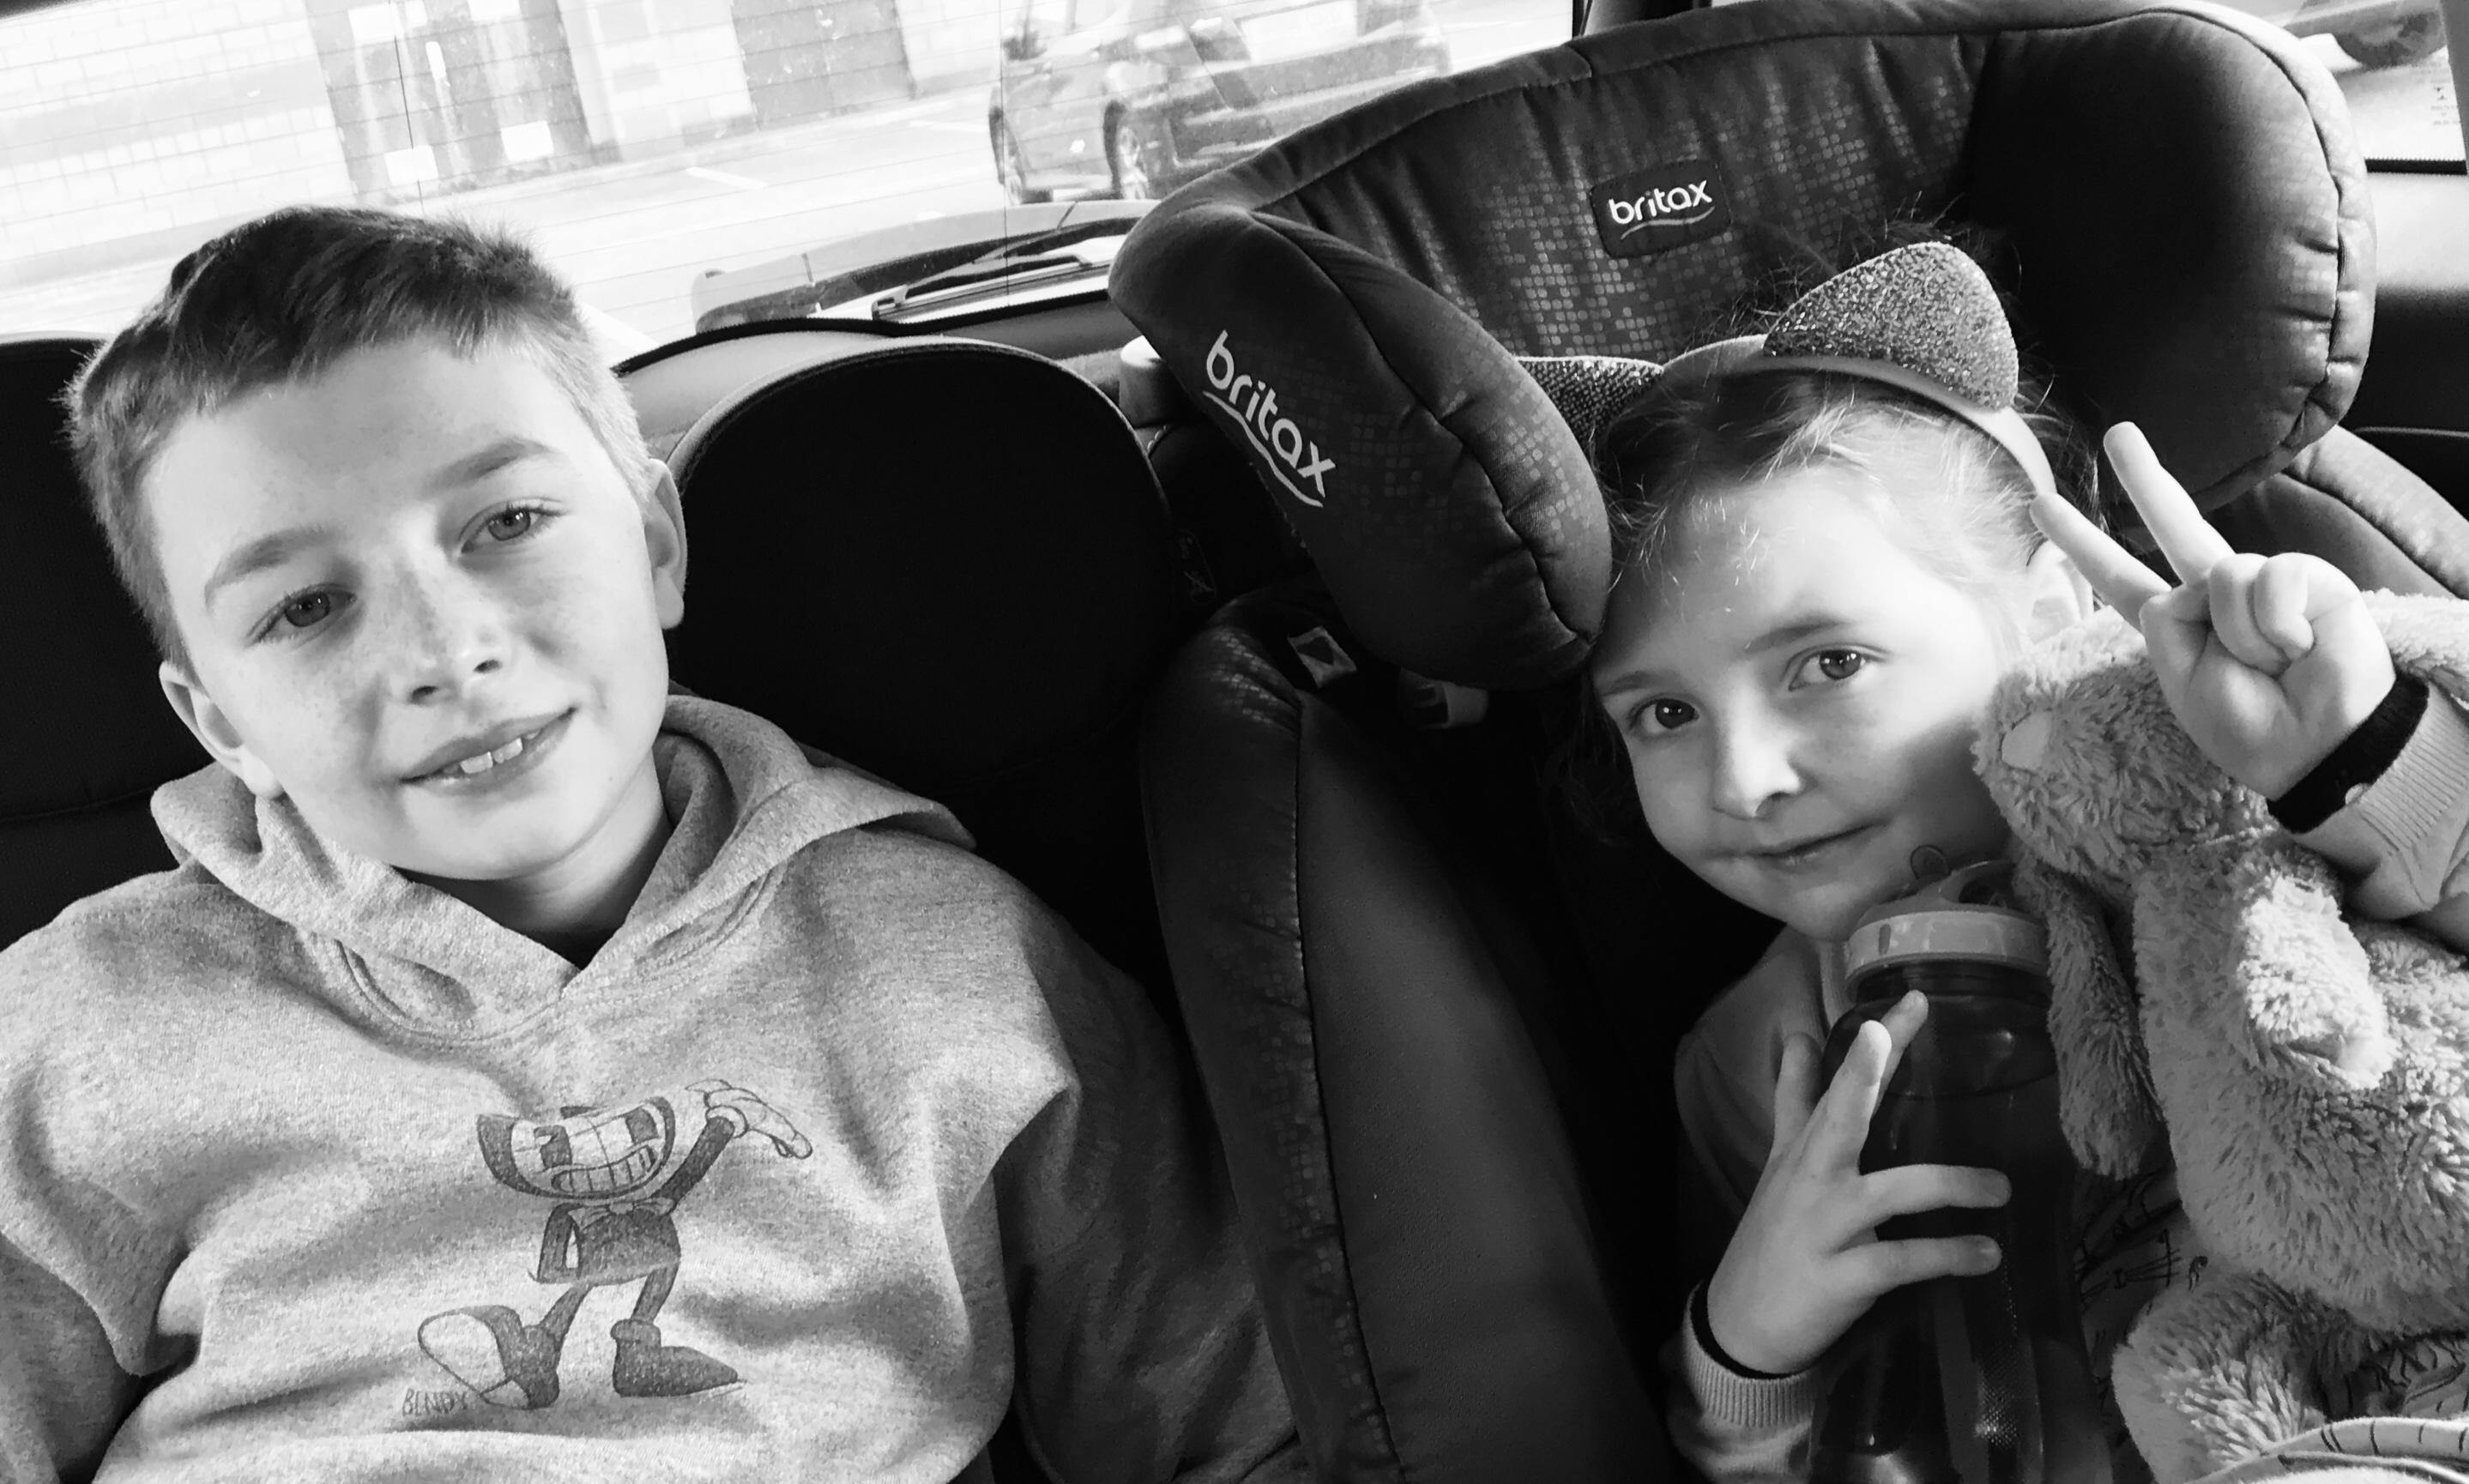 The Siblings Project - Happy Travels (March 2019)